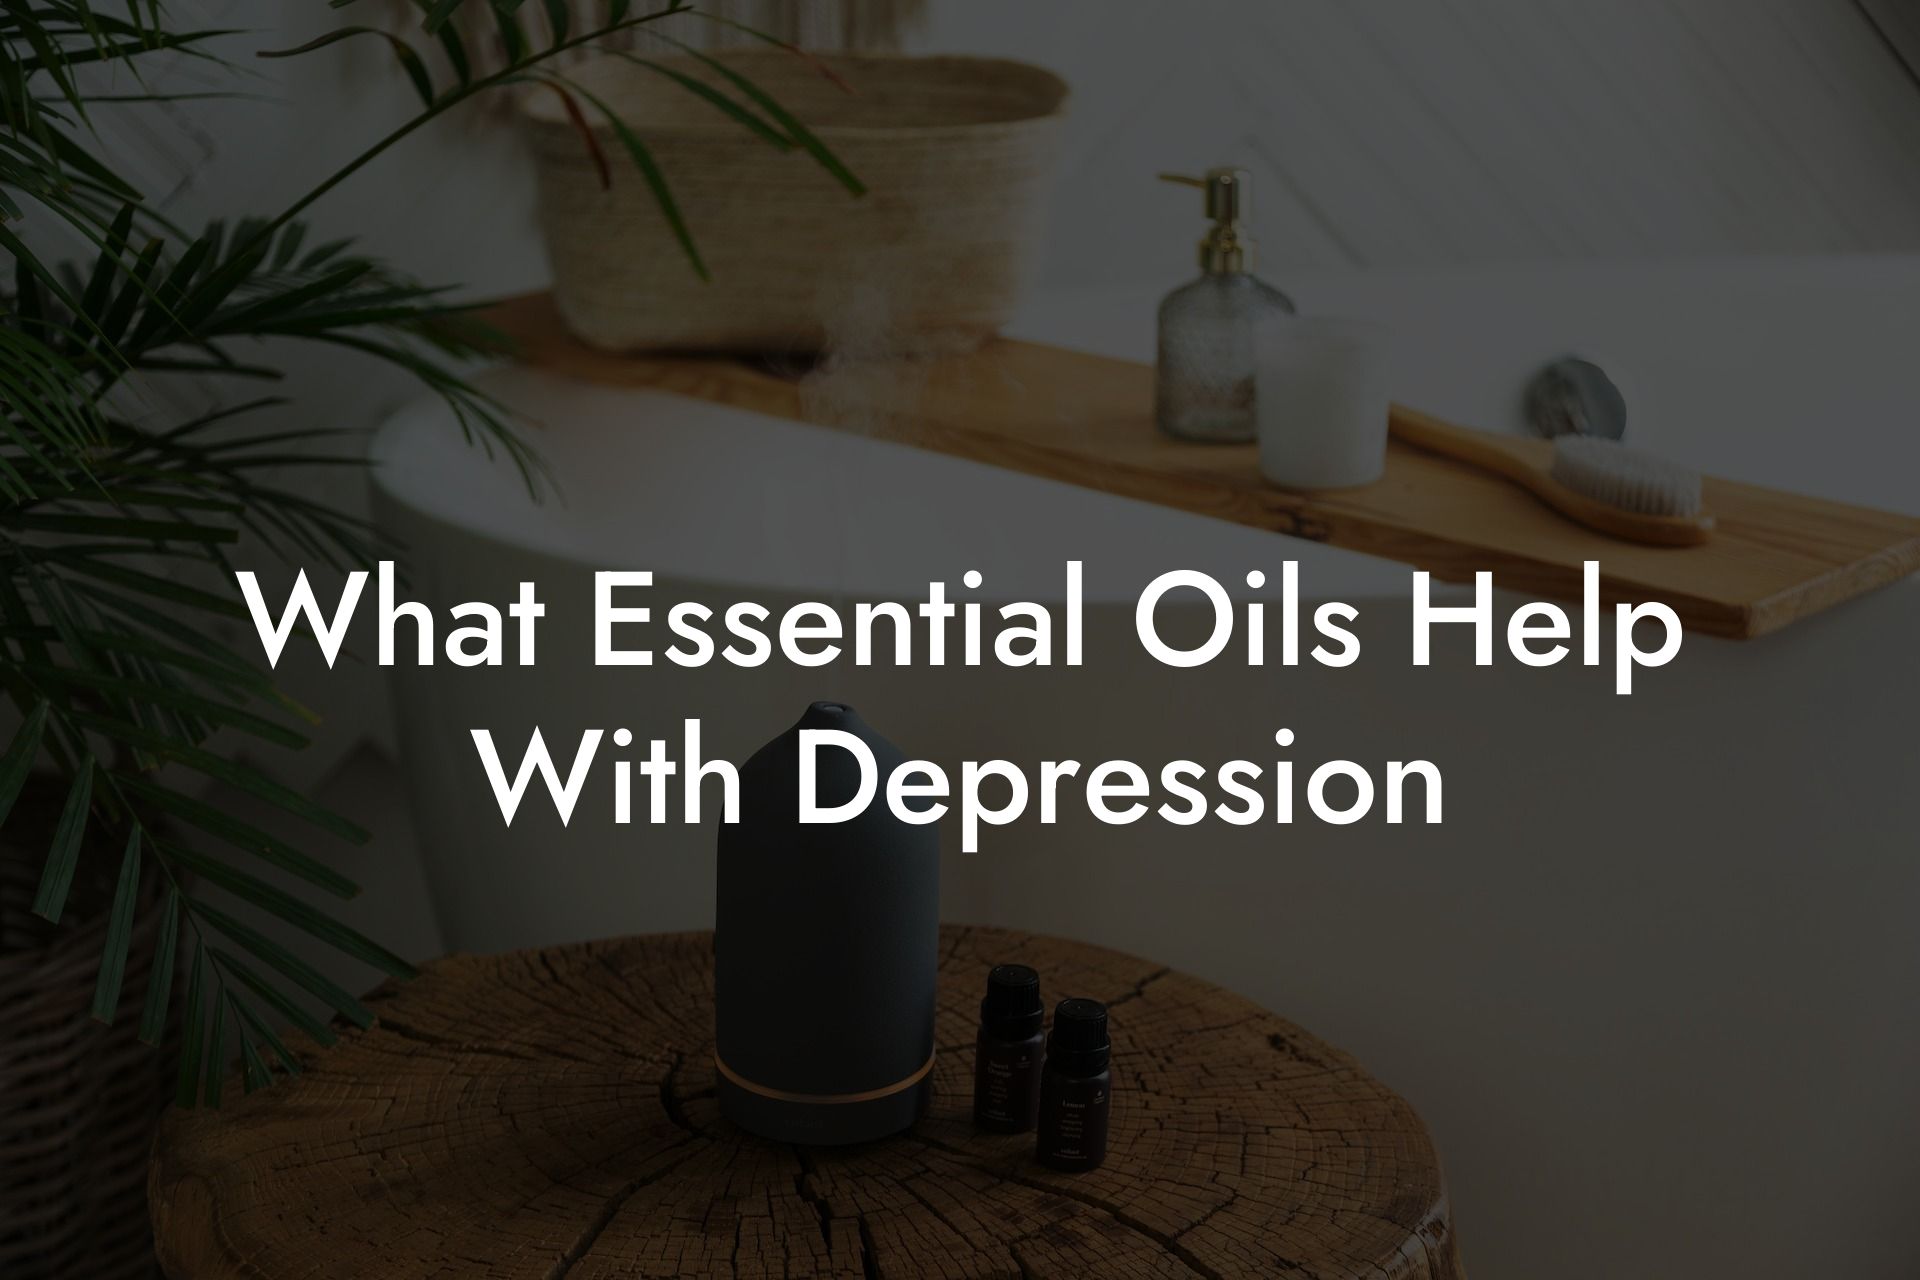 What Essential Oils Help With Depression